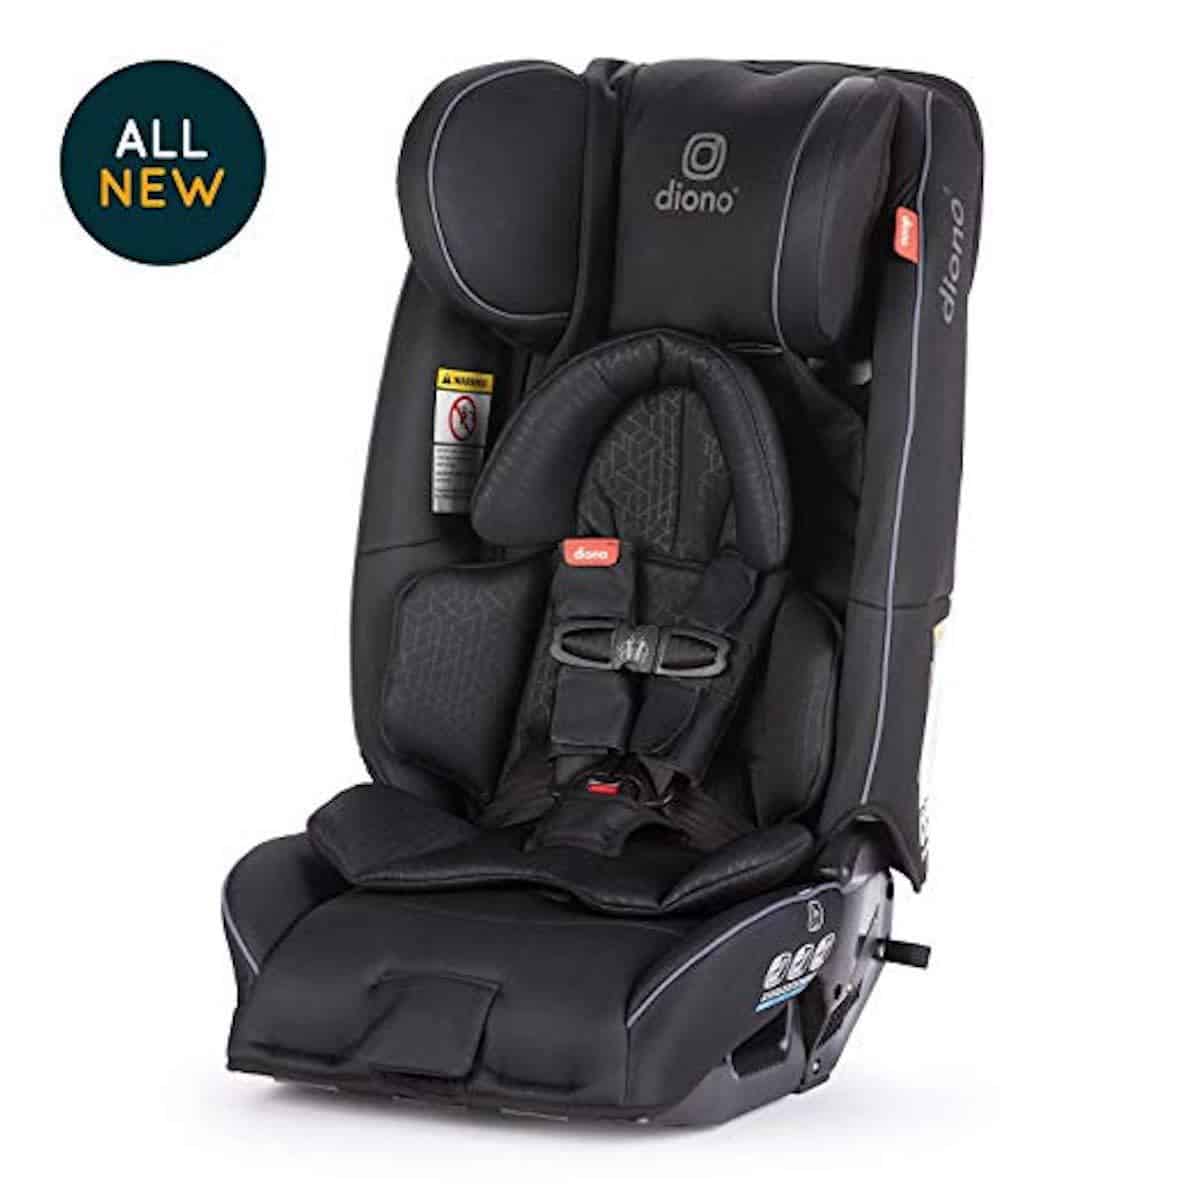 13 Best Extended Rear Facing Car Seats » Read Now!